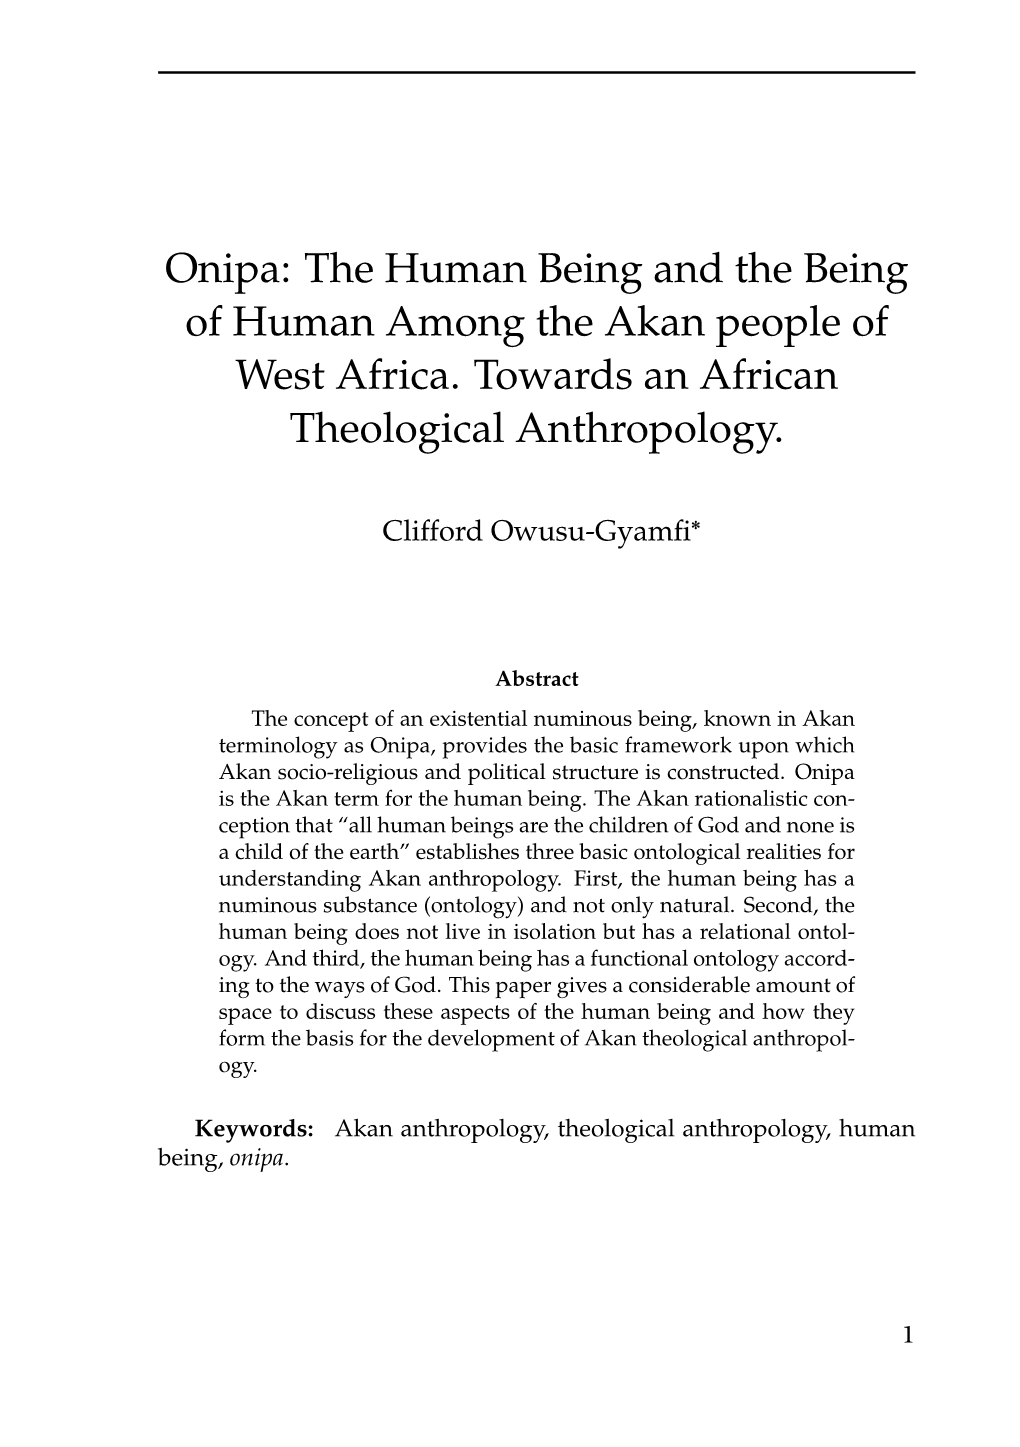 Onipa: the Human Being and the Being of Human Among the Akan People of West Africa